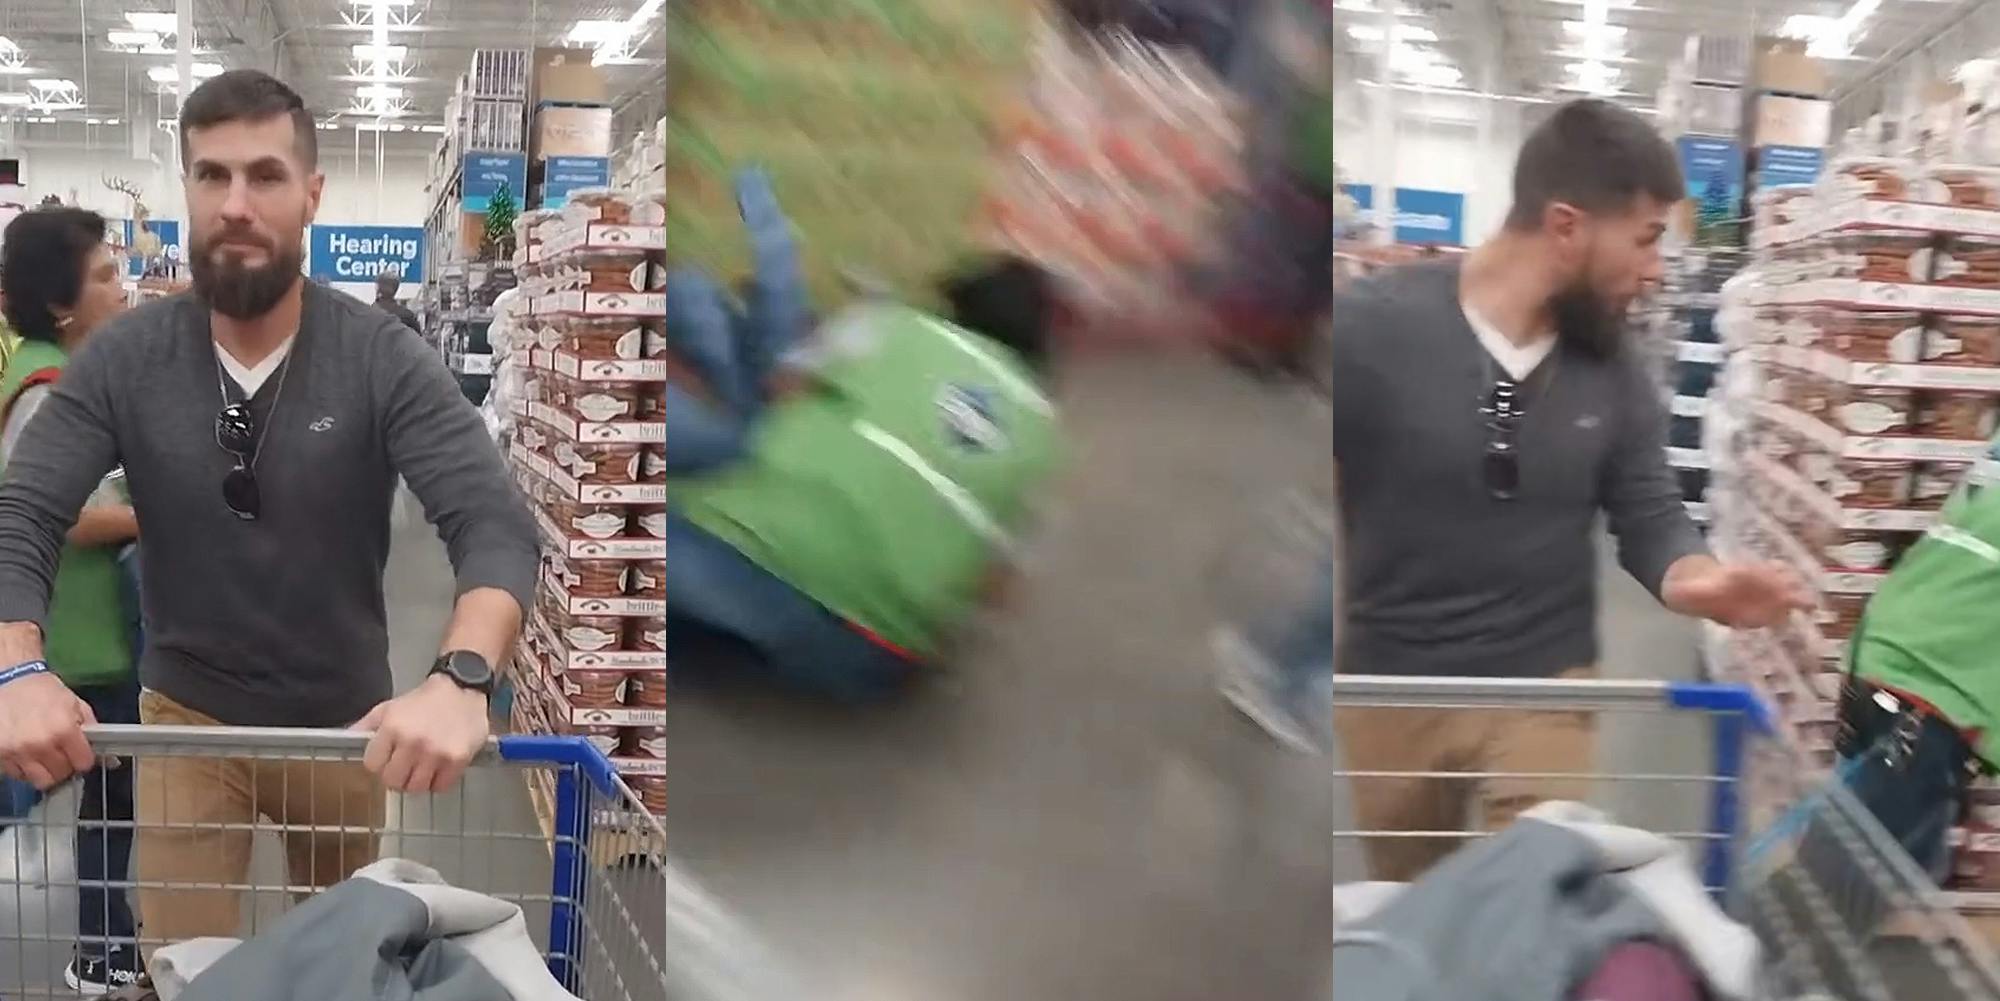 Customer Trips Sam's Club Worker While Filming Video